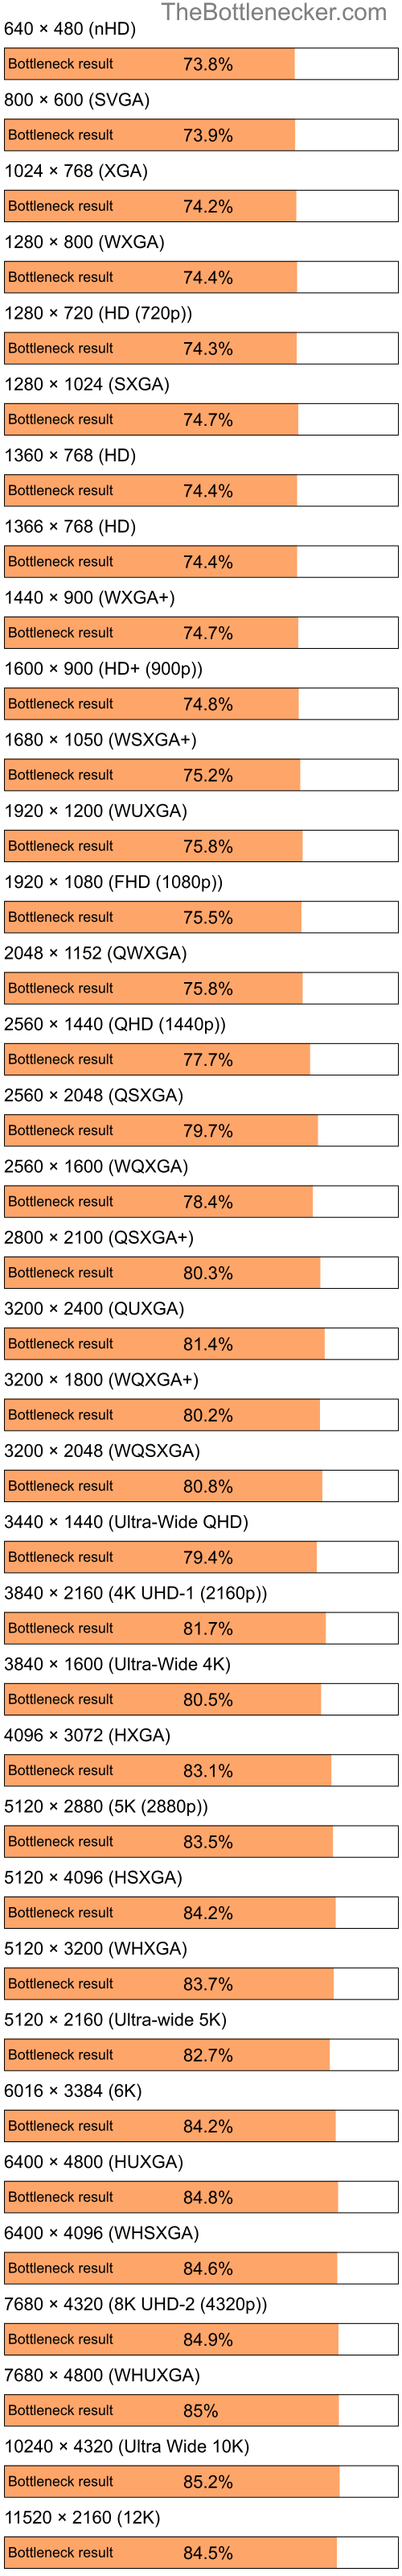 Bottleneck results by resolution for Intel Pentium 4 and AMD Radeon 9600 Family in Processor Intense Tasks